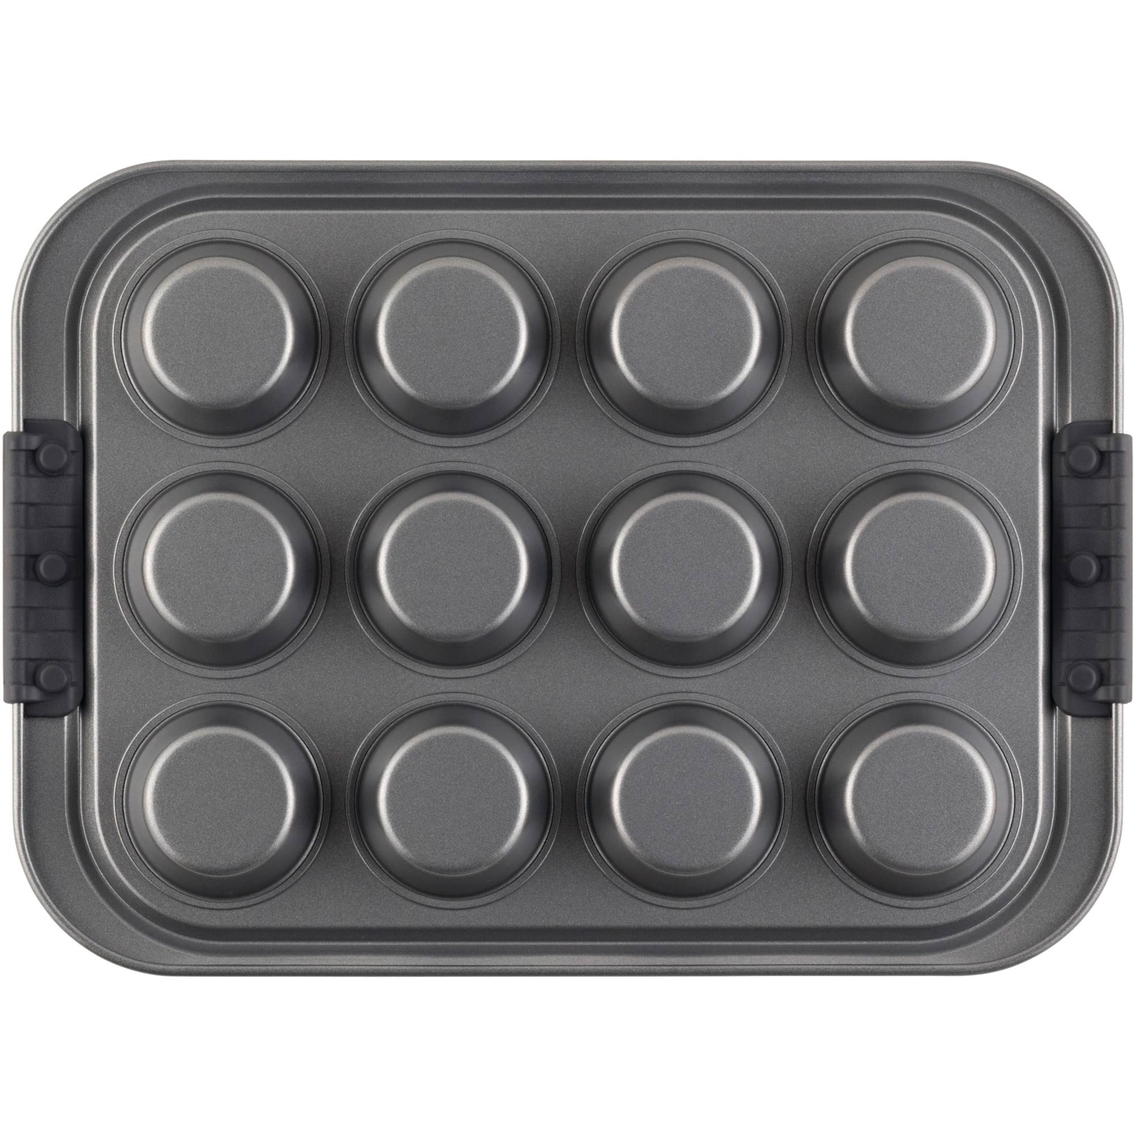 Anolon Advanced Nonstick Bakeware 12 Cup Silicone Grips Covered Muffin Pan - Image 4 of 4